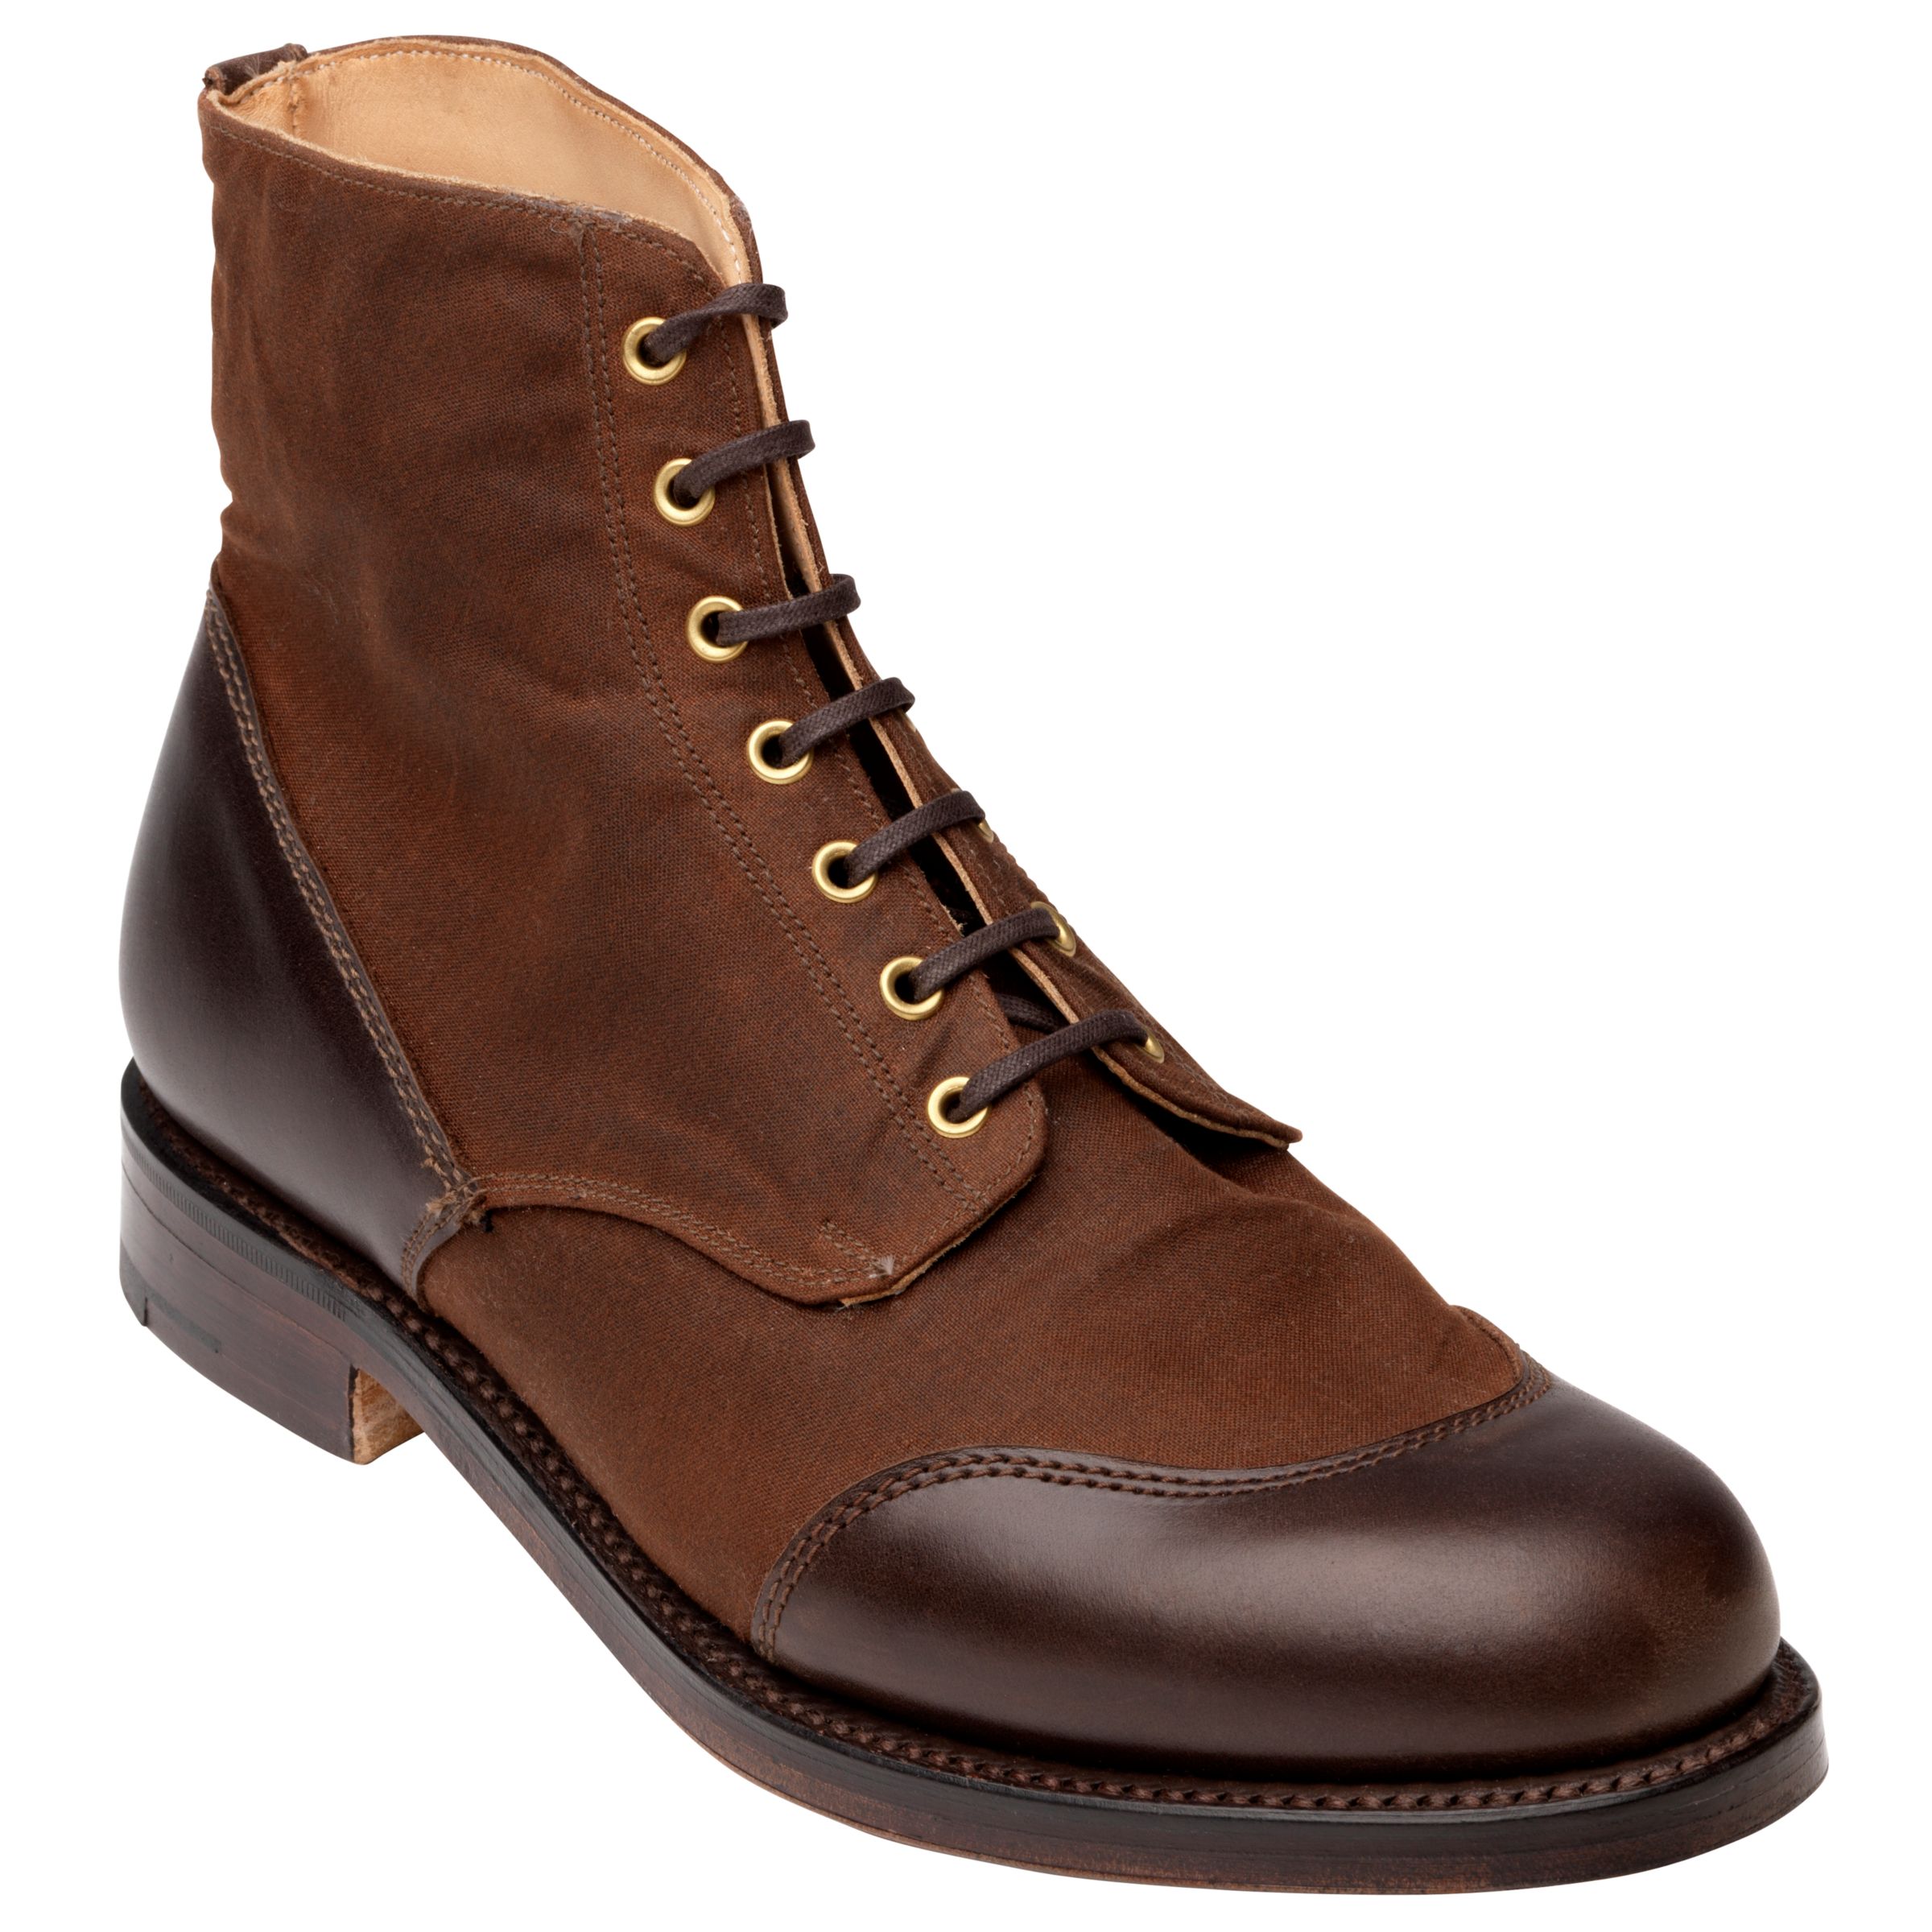 Grenson Glenn Lace Up Boots, Brown at John Lewis